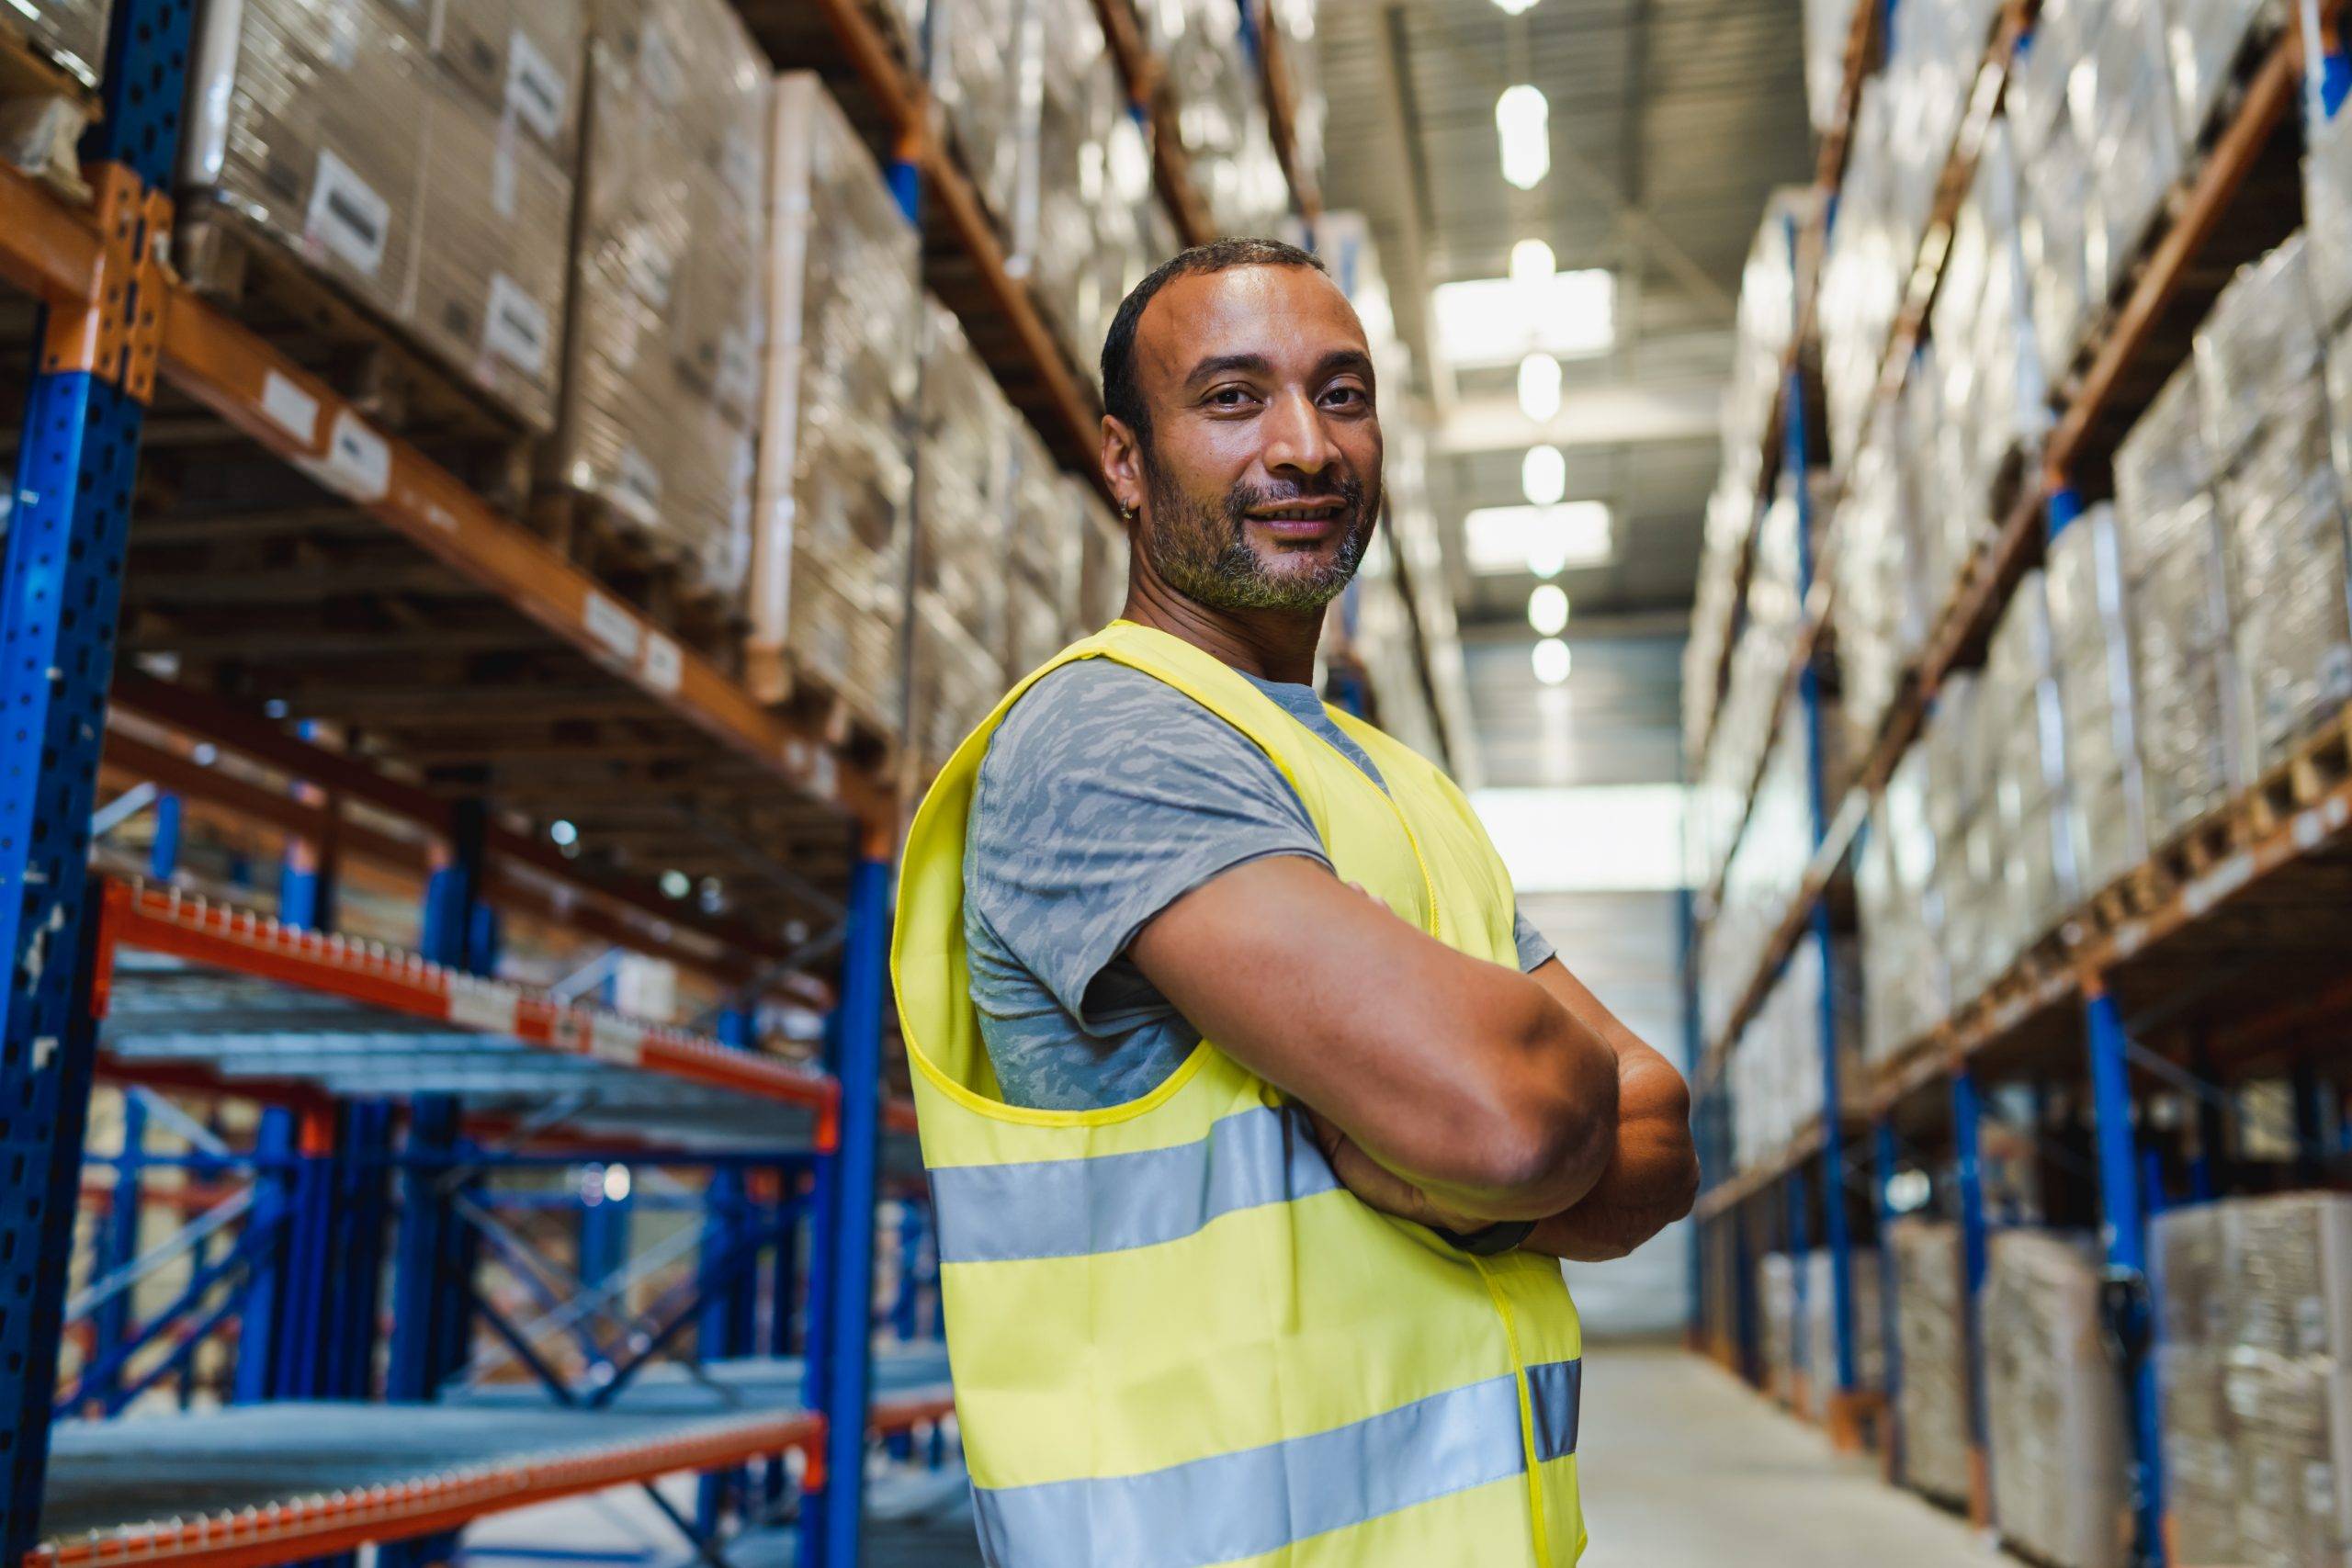 Essential worker standing in warehouse aisle